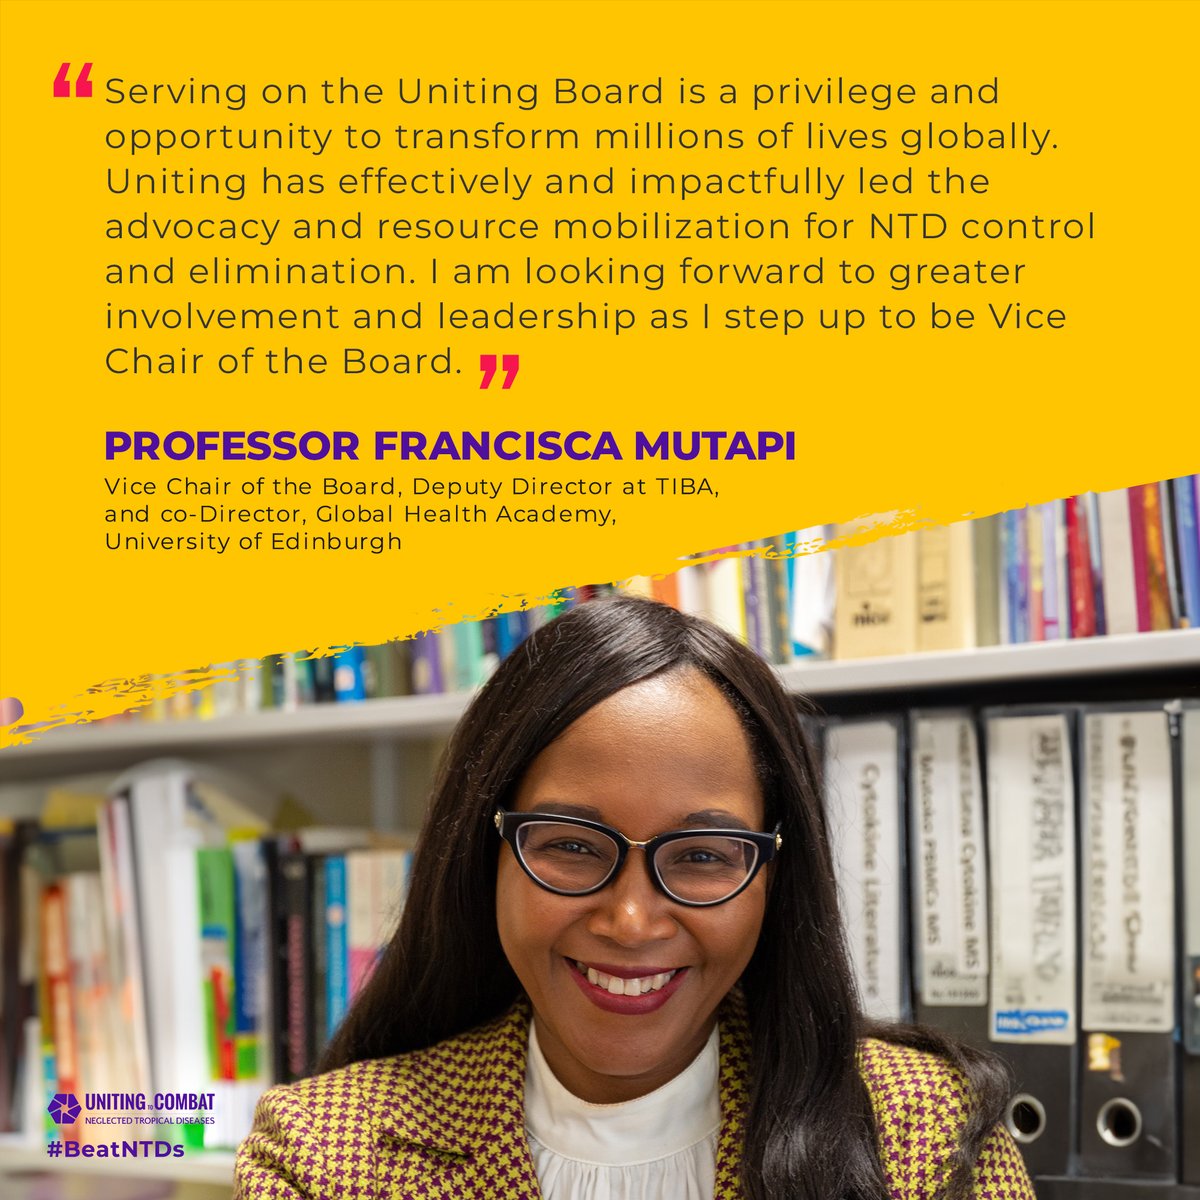 We thank Professor Mutapi for her insight, advice and leadership to date and we're excited to work with her in this new role. #BeatNTDs